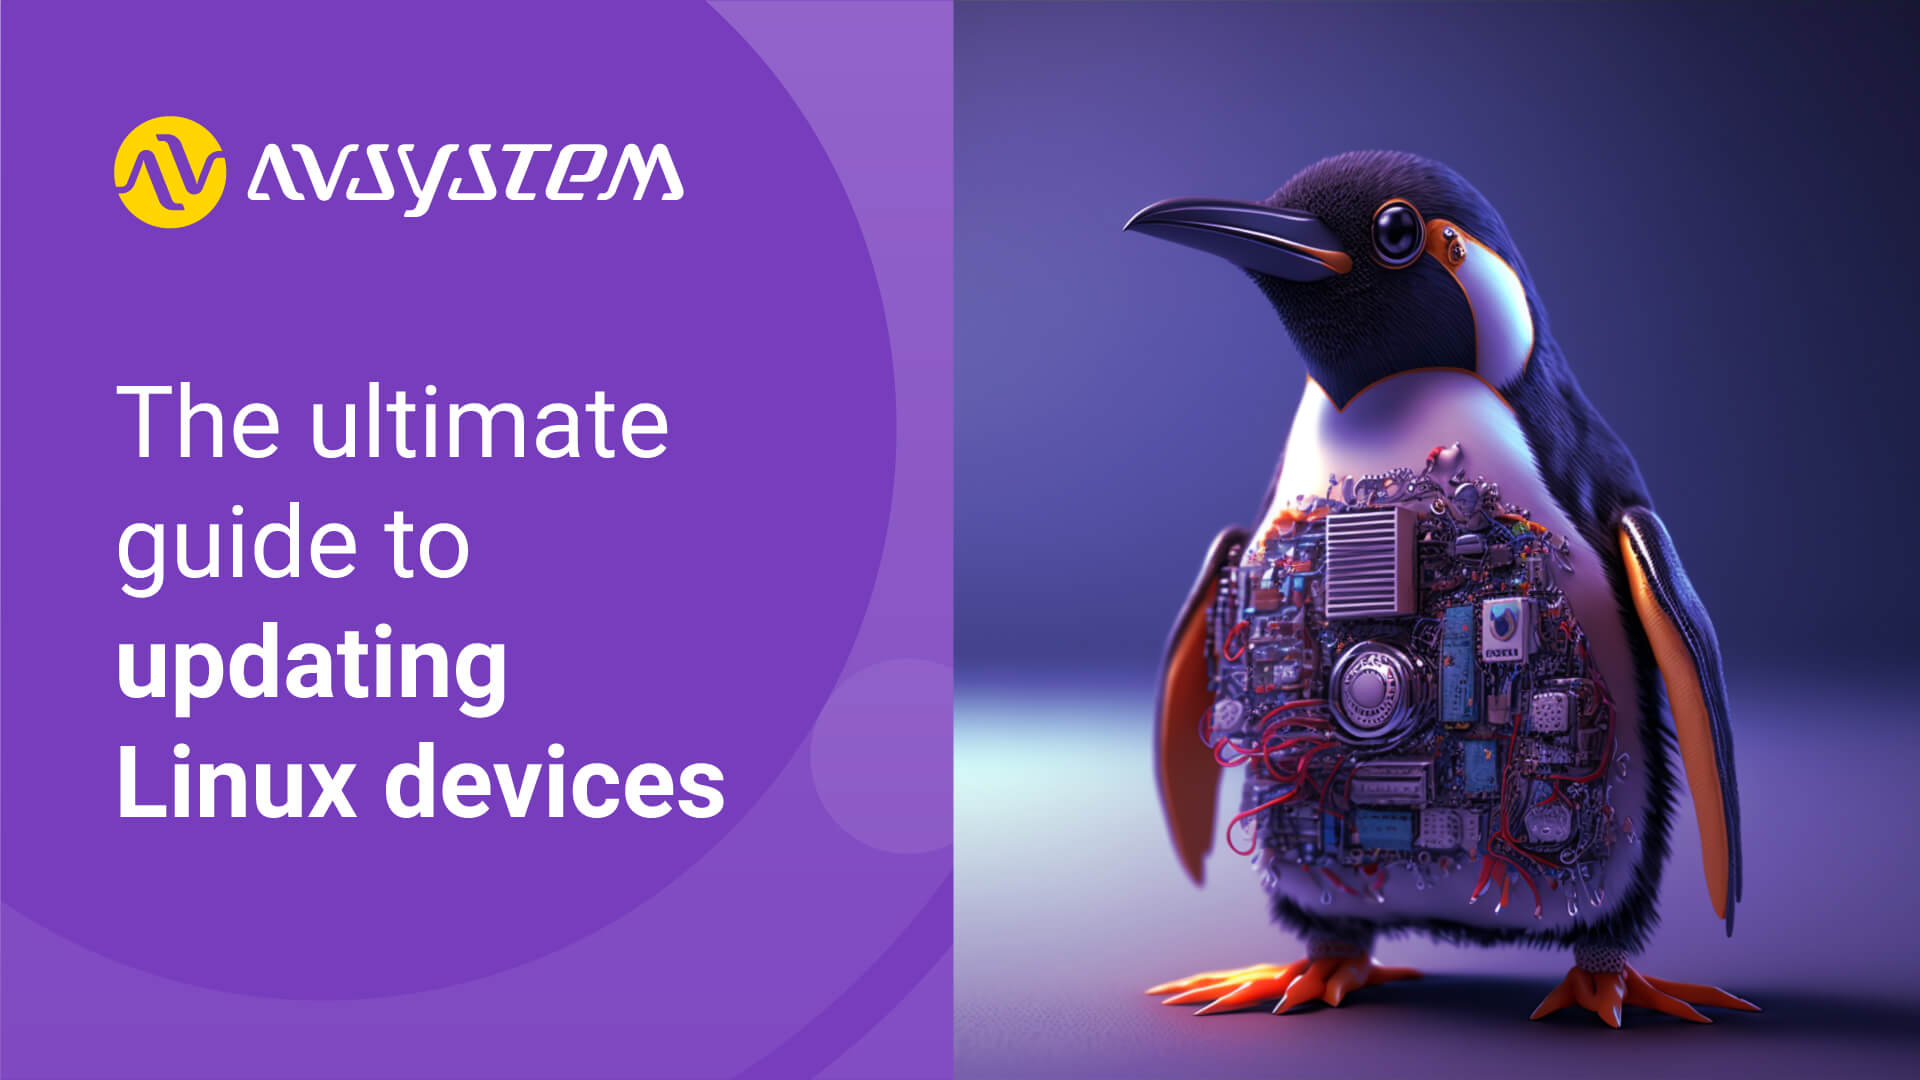 Everything you ever wanted to know about updating Linux devices